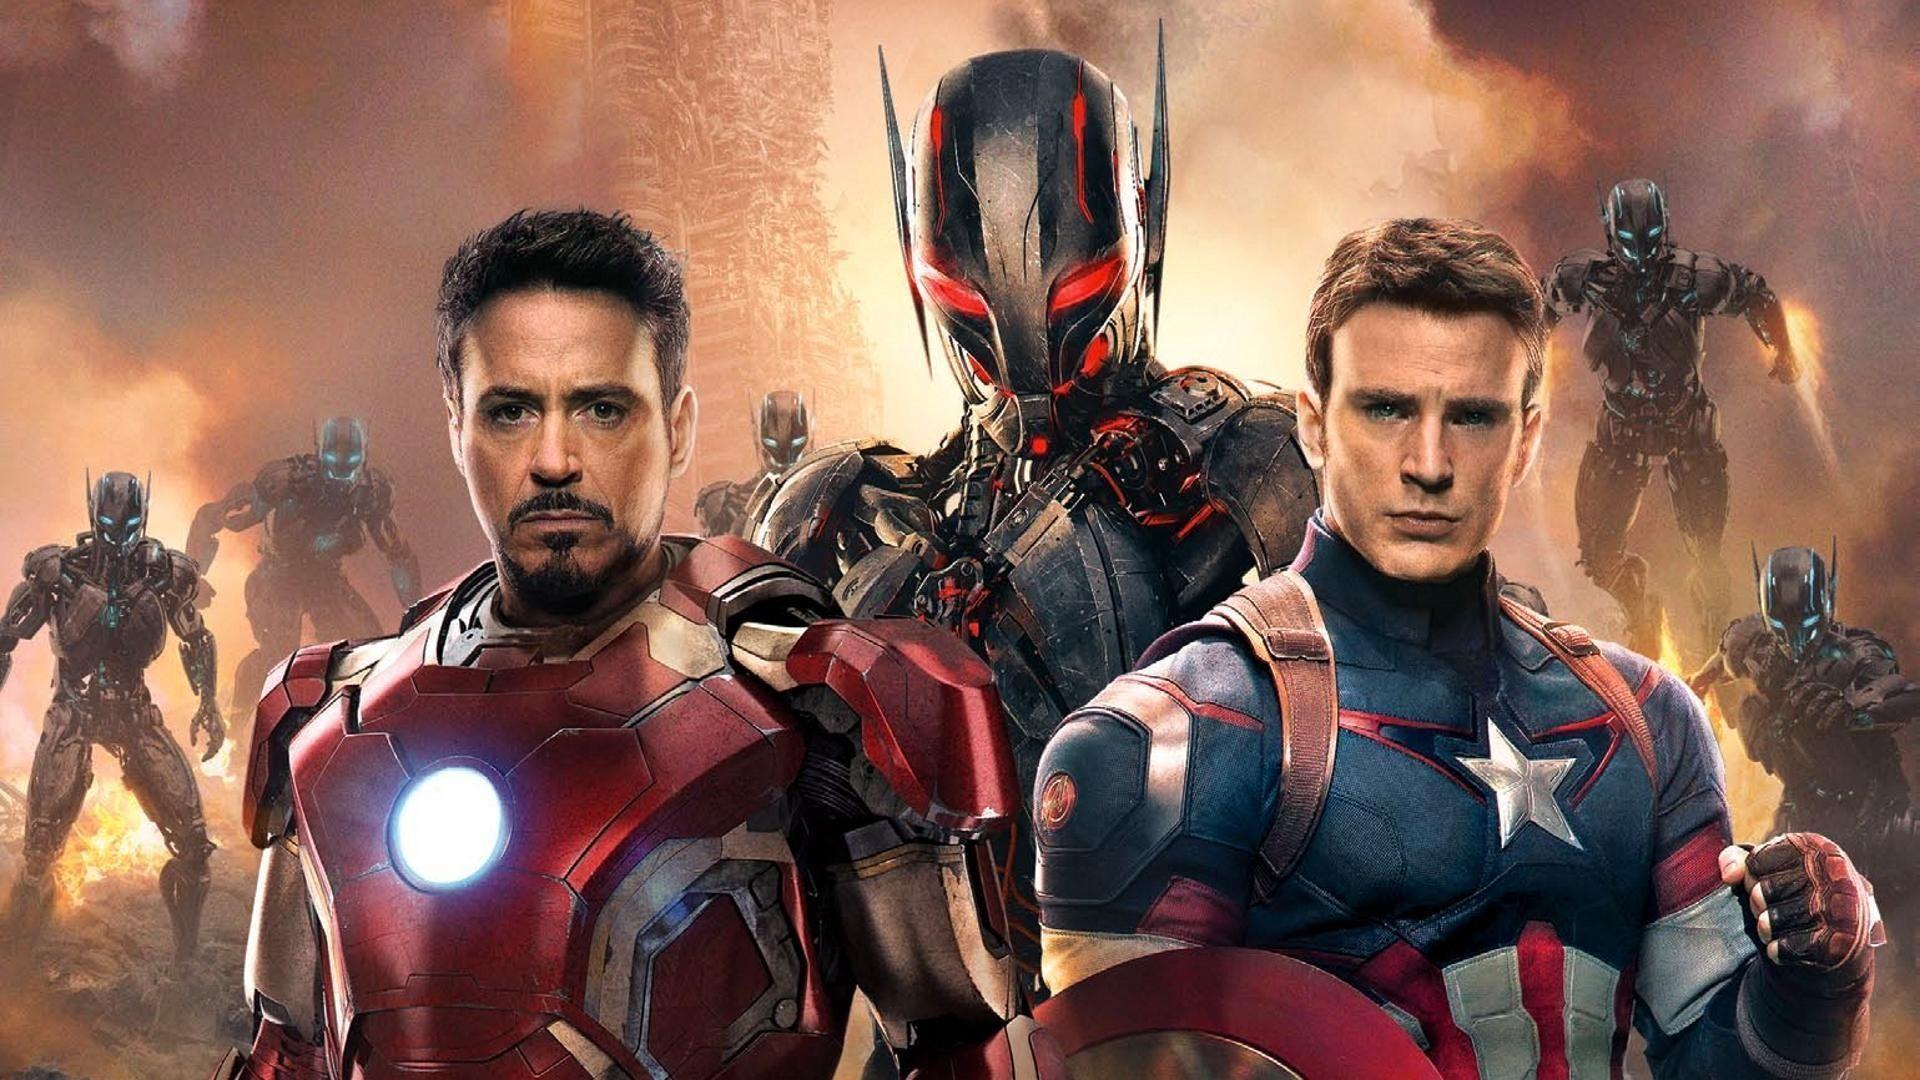 Iron Man and Captain America in Avengers Age of Ultron 2015